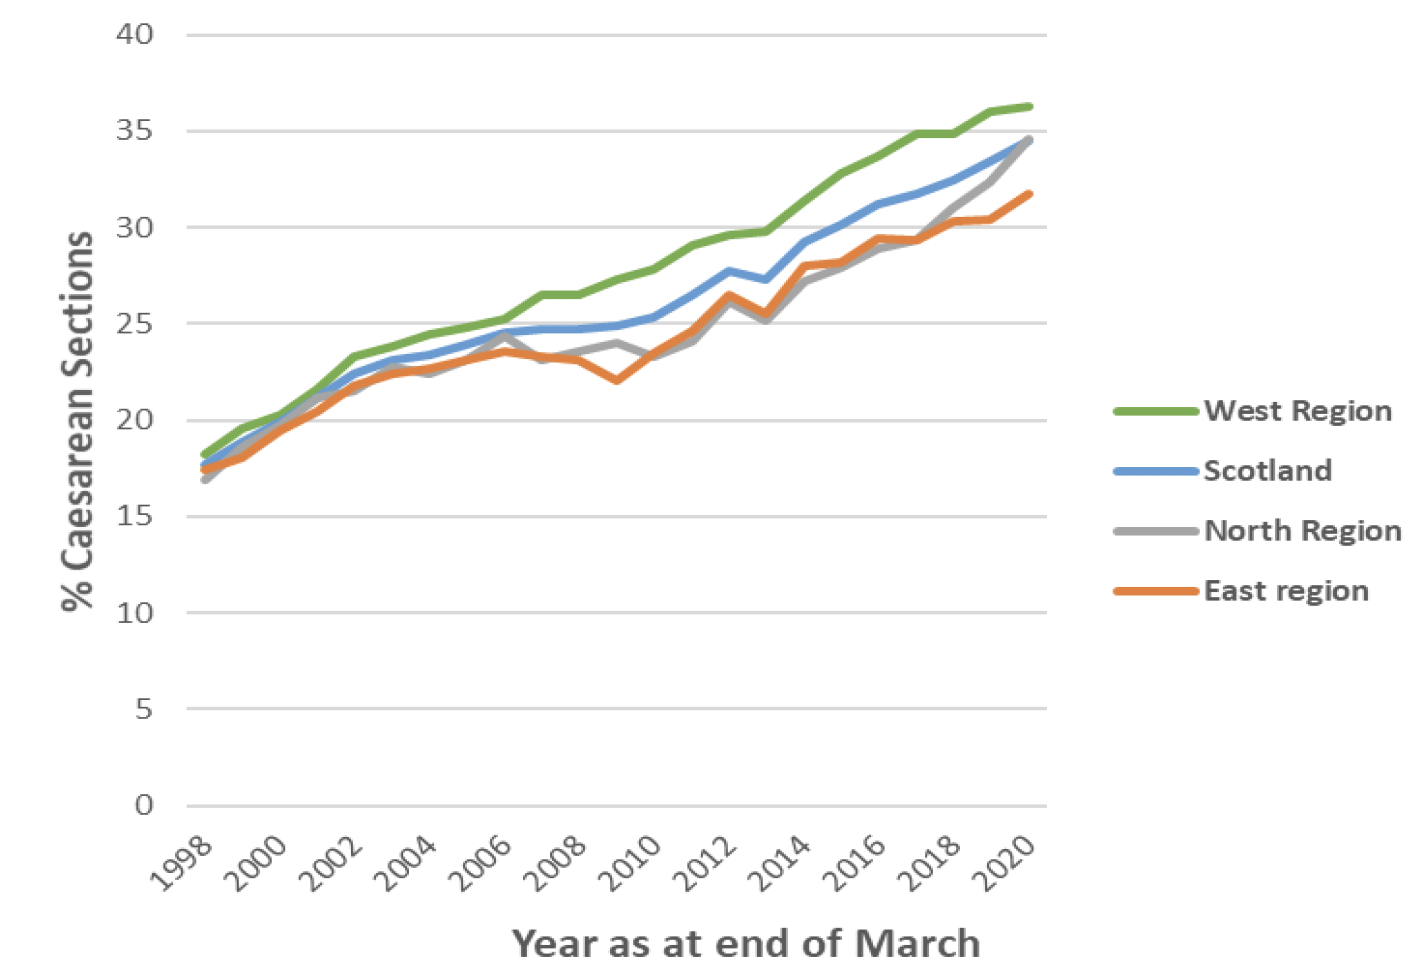 Chart 5 shows the increase in both elective and emergency caesarean sections, with elective increasing from 4% to 17% and emergency increasing from 4% to 18% between 1975/76 and 2019/20.  